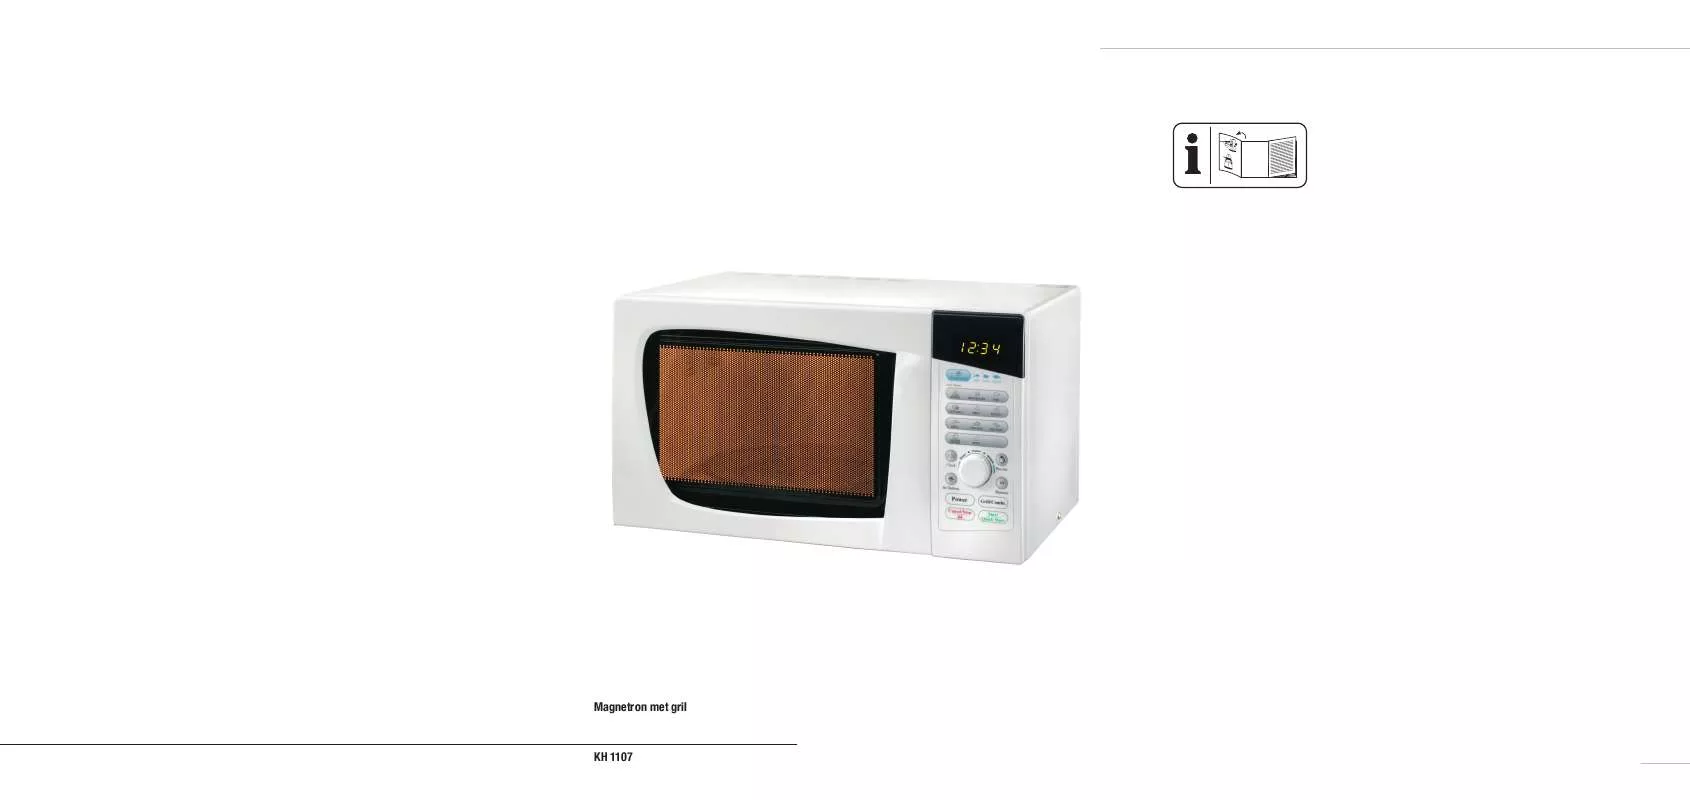 Mode d'emploi BIFINETT KH 1107 MICROWAVE OVEN WITH GRILL